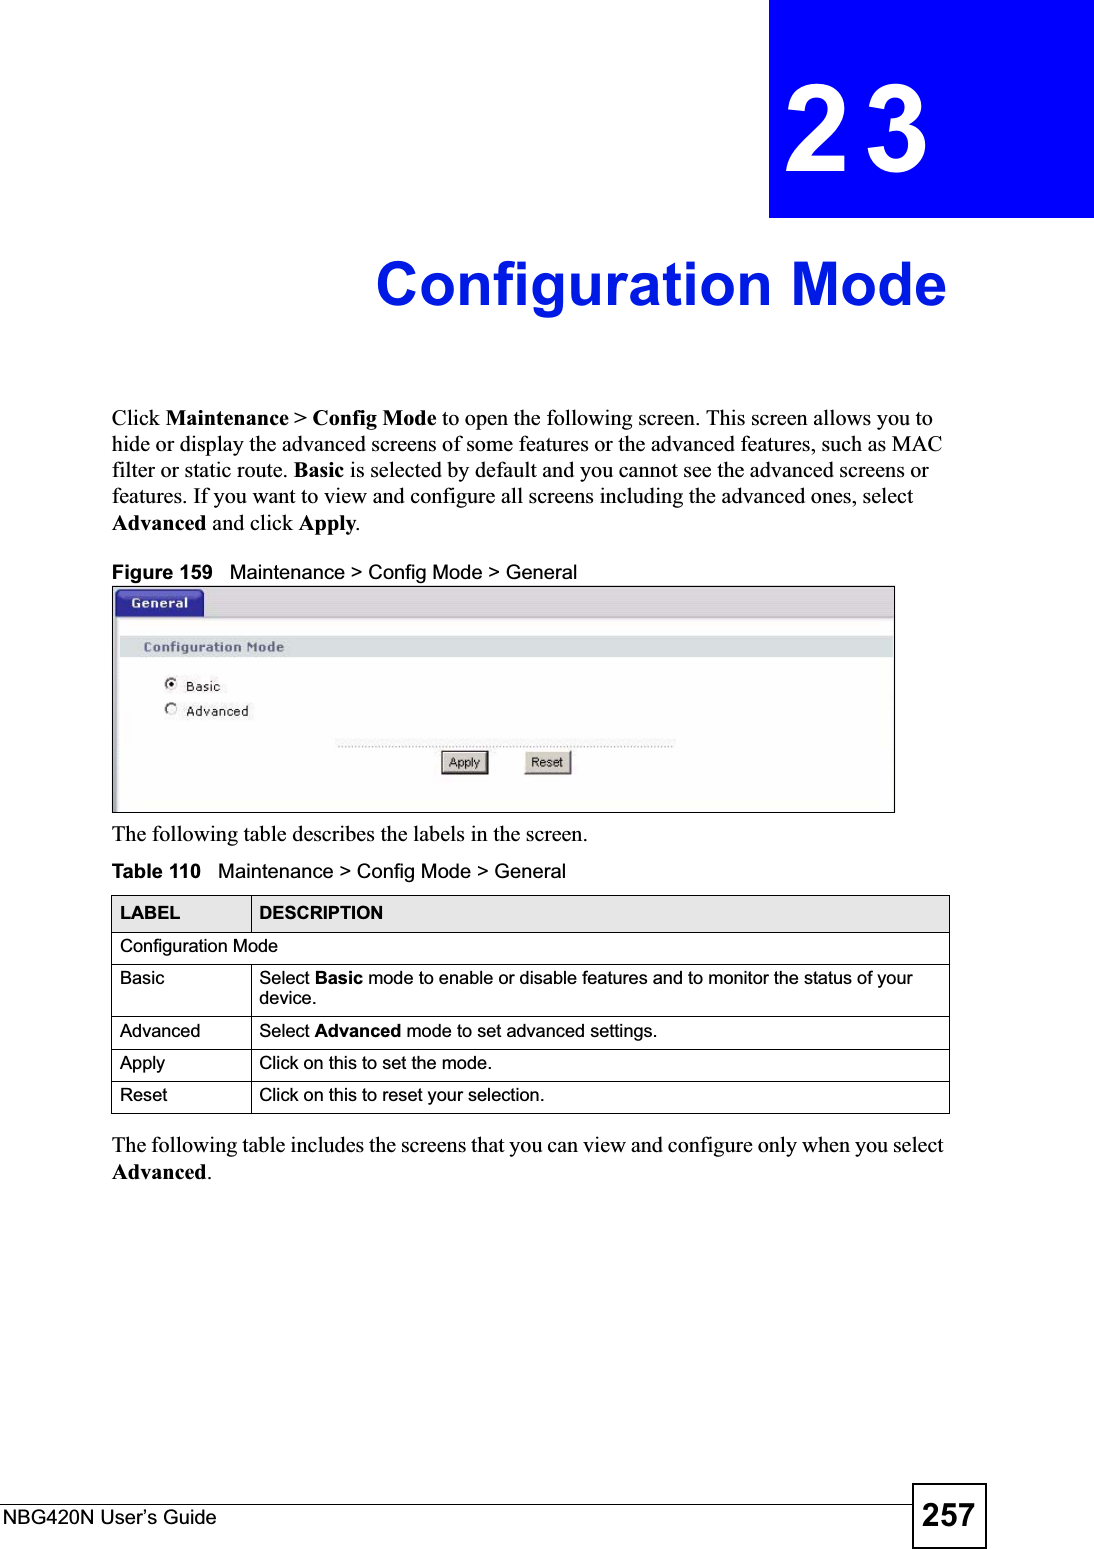 NBG420N User’s Guide 257CHAPTER 23Configuration ModeClick Maintenance &gt; Config Mode to open the following screen. This screen allows you to hide or display the advanced screens of some features or the advanced features, such as MAC filter or static route. Basic is selected by default and you cannot see the advanced screens or features. If you want to view and configure all screens including the advanced ones, select Advanced and click Apply.Figure 159   Maintenance &gt; Config Mode &gt; General The following table describes the labels in the screen.Table 110   Maintenance &gt; Config Mode &gt; General The following table includes the screens that you can view and configure only when you select Advanced.LABEL DESCRIPTIONConfiguration ModeBasic Select Basic mode to enable or disable features and to monitor the status of your device.Advanced Select Advanced mode to set advanced settings.Apply Click on this to set the mode.Reset Click on this to reset your selection.